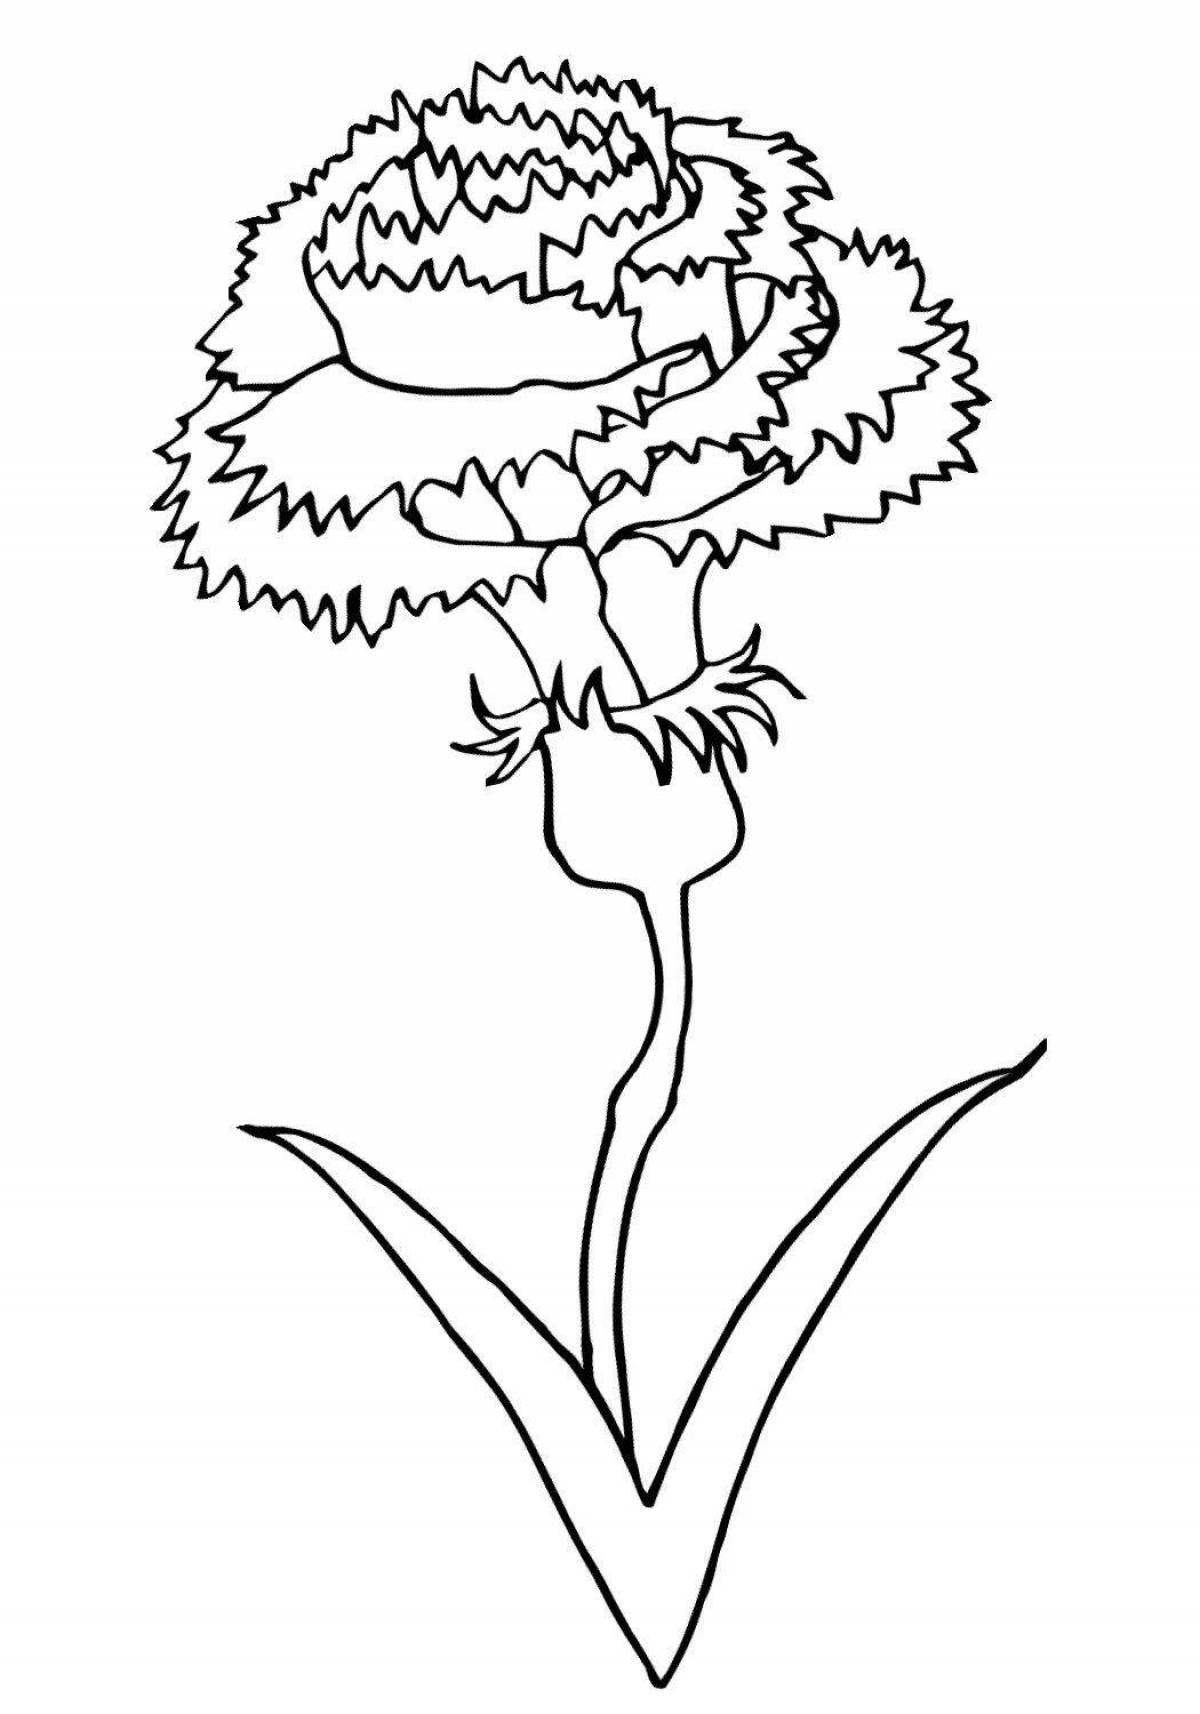 Coloring book cheerful bouquet of carnations